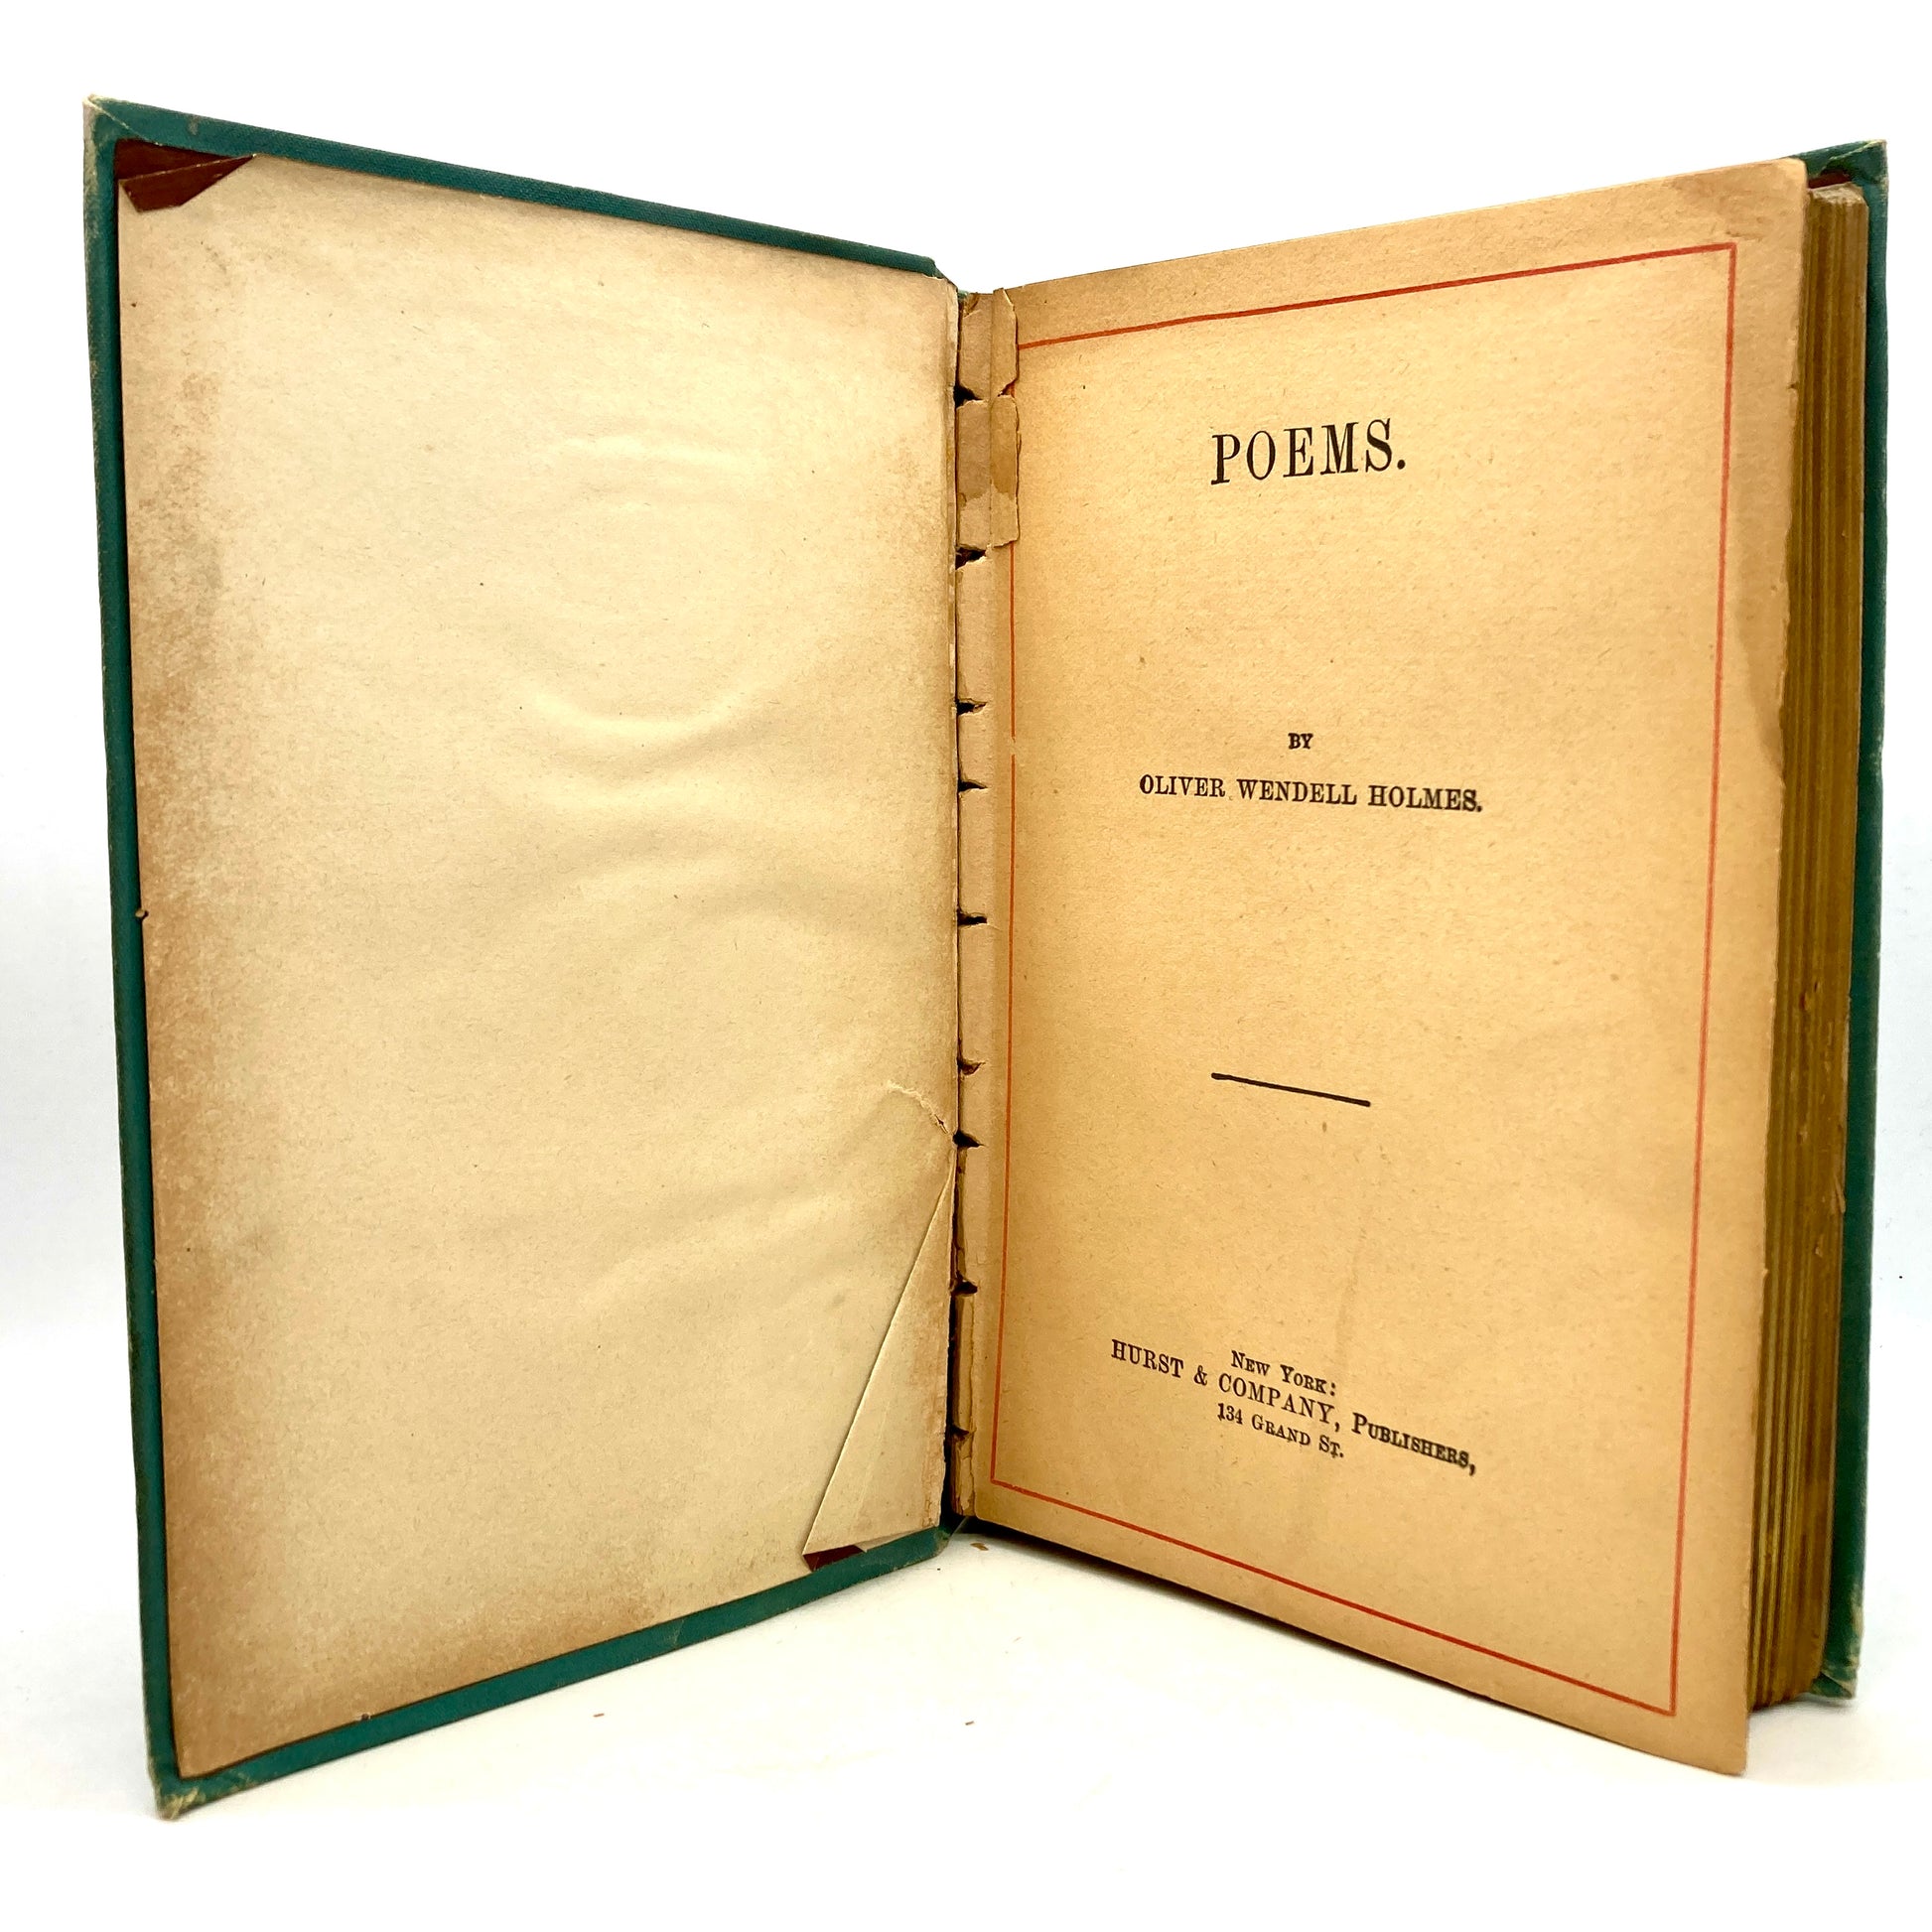 HOLMES, Oliver Wendell "Poems" [Hurst & Co, c1880s] - Buzz Bookstore